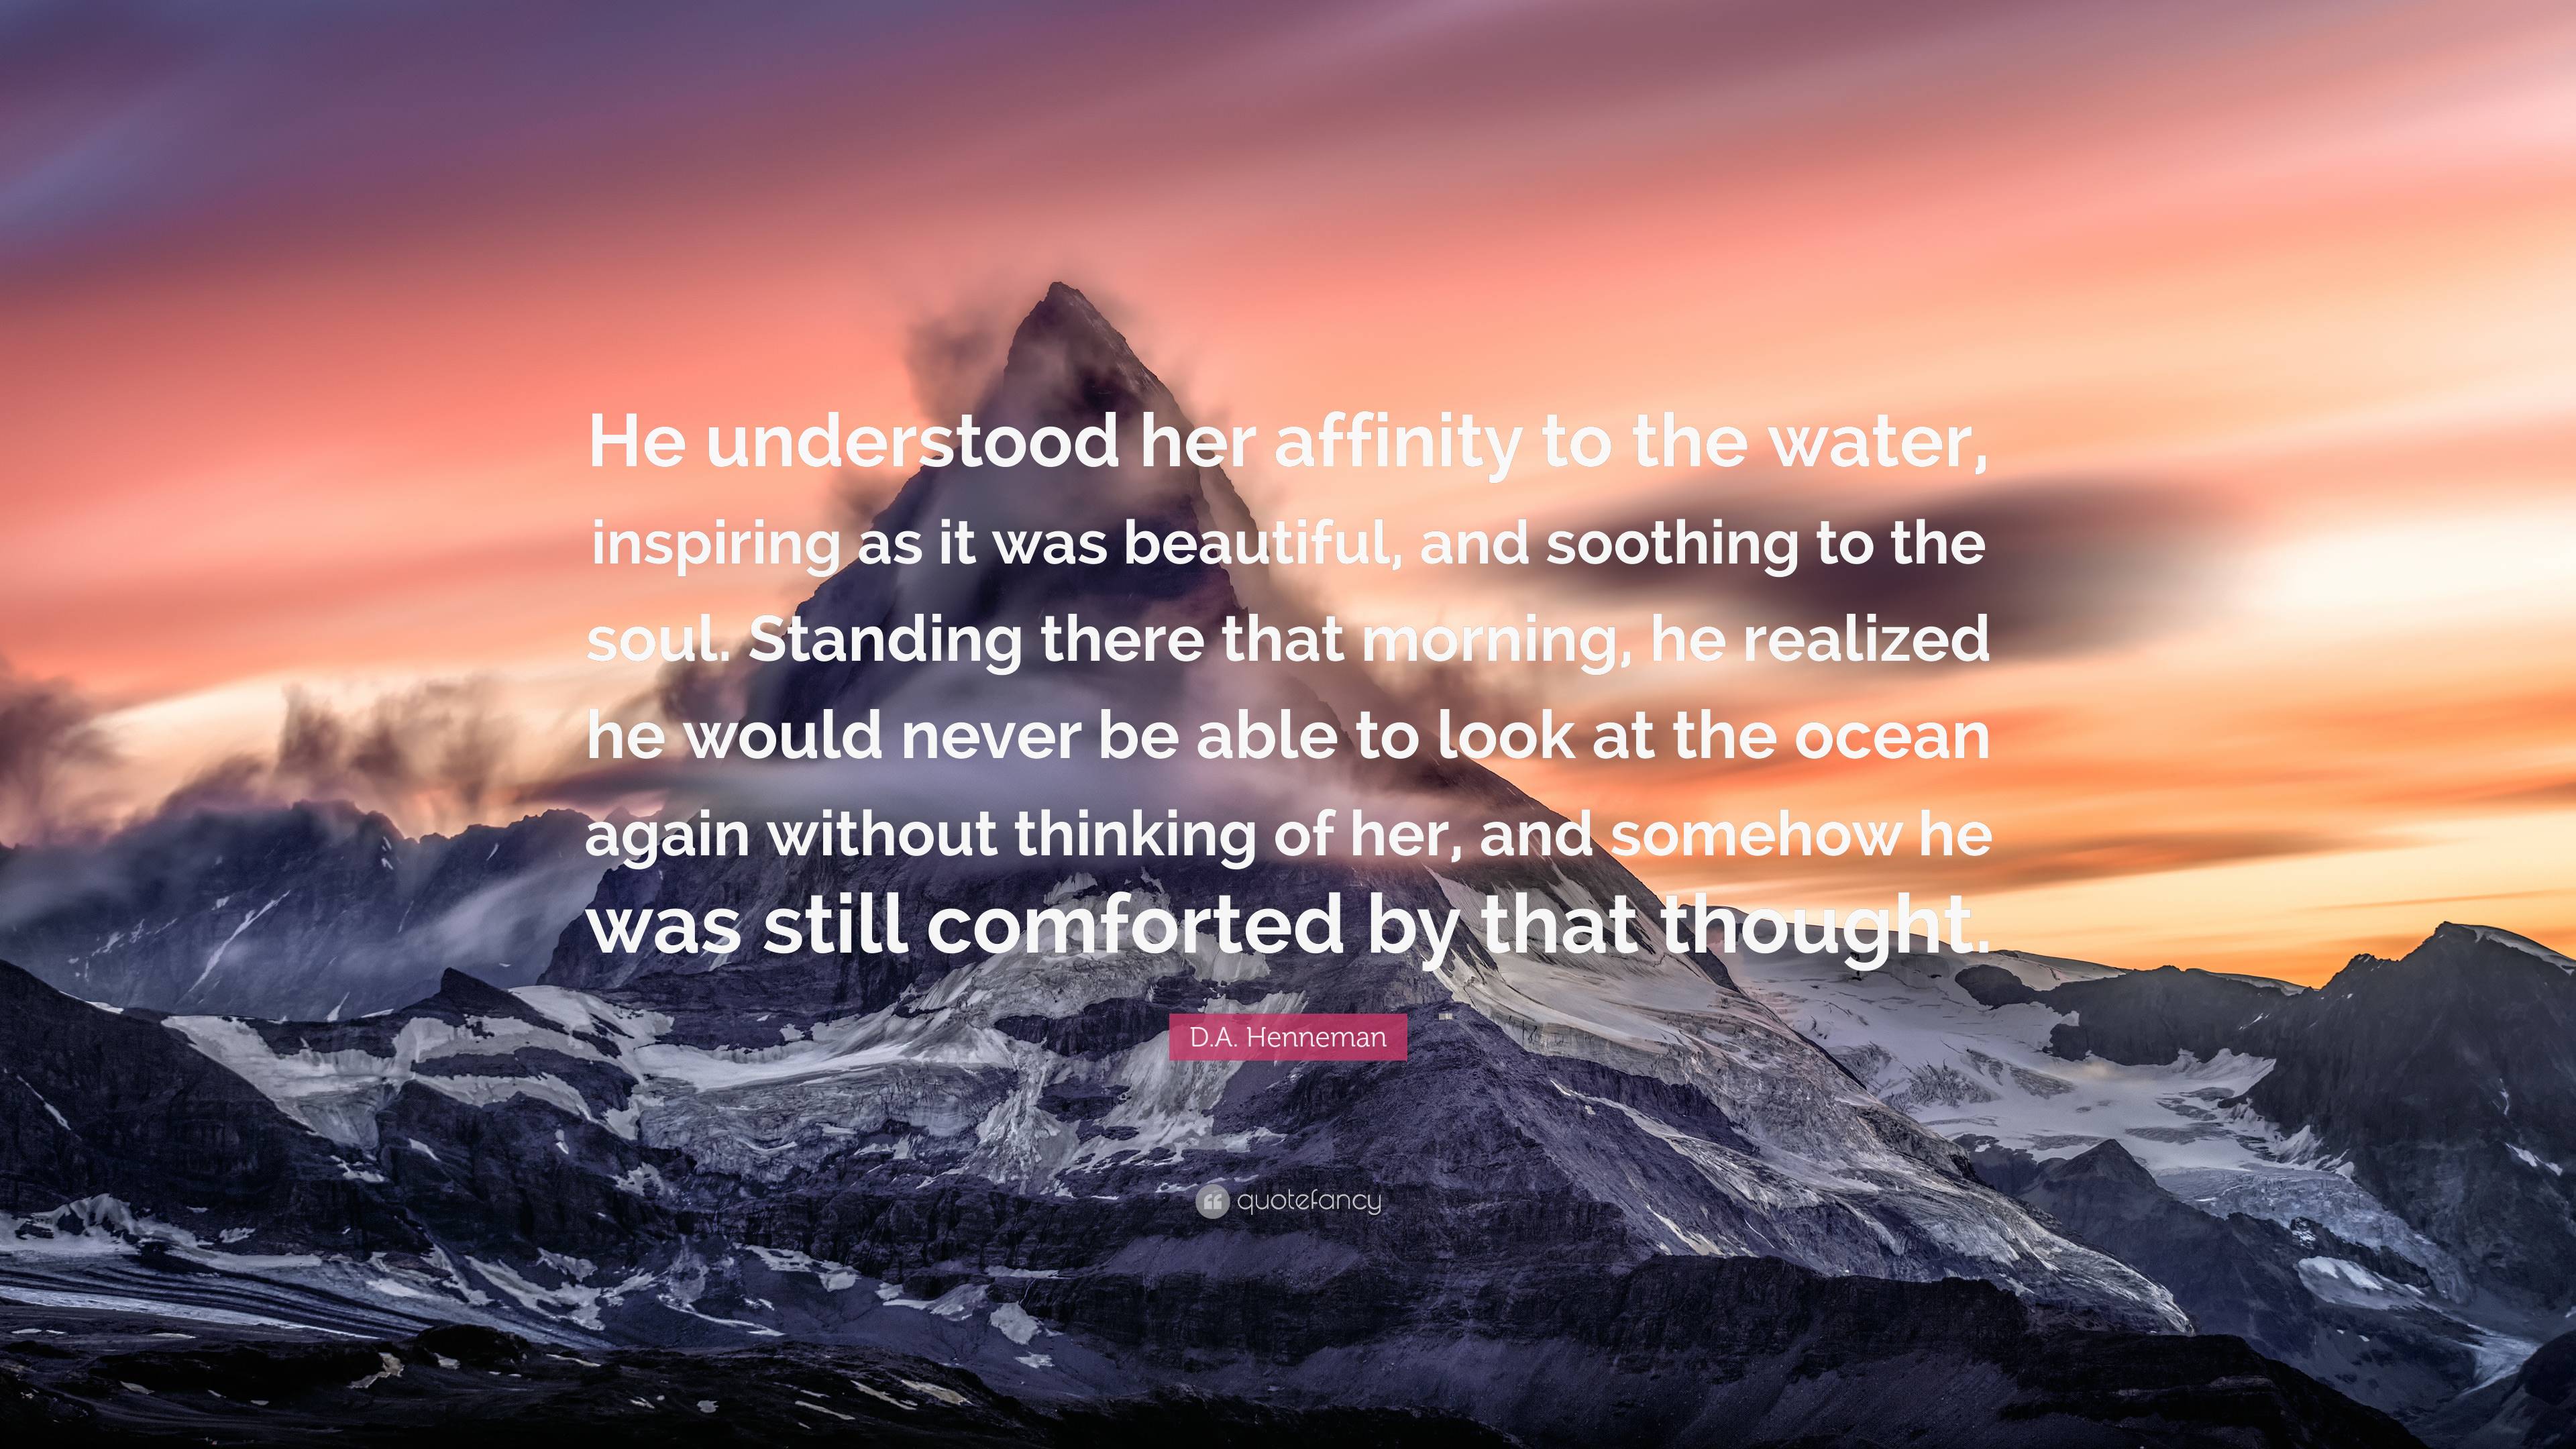 D.A. Henneman Quote: “He understood her affinity to the water ...